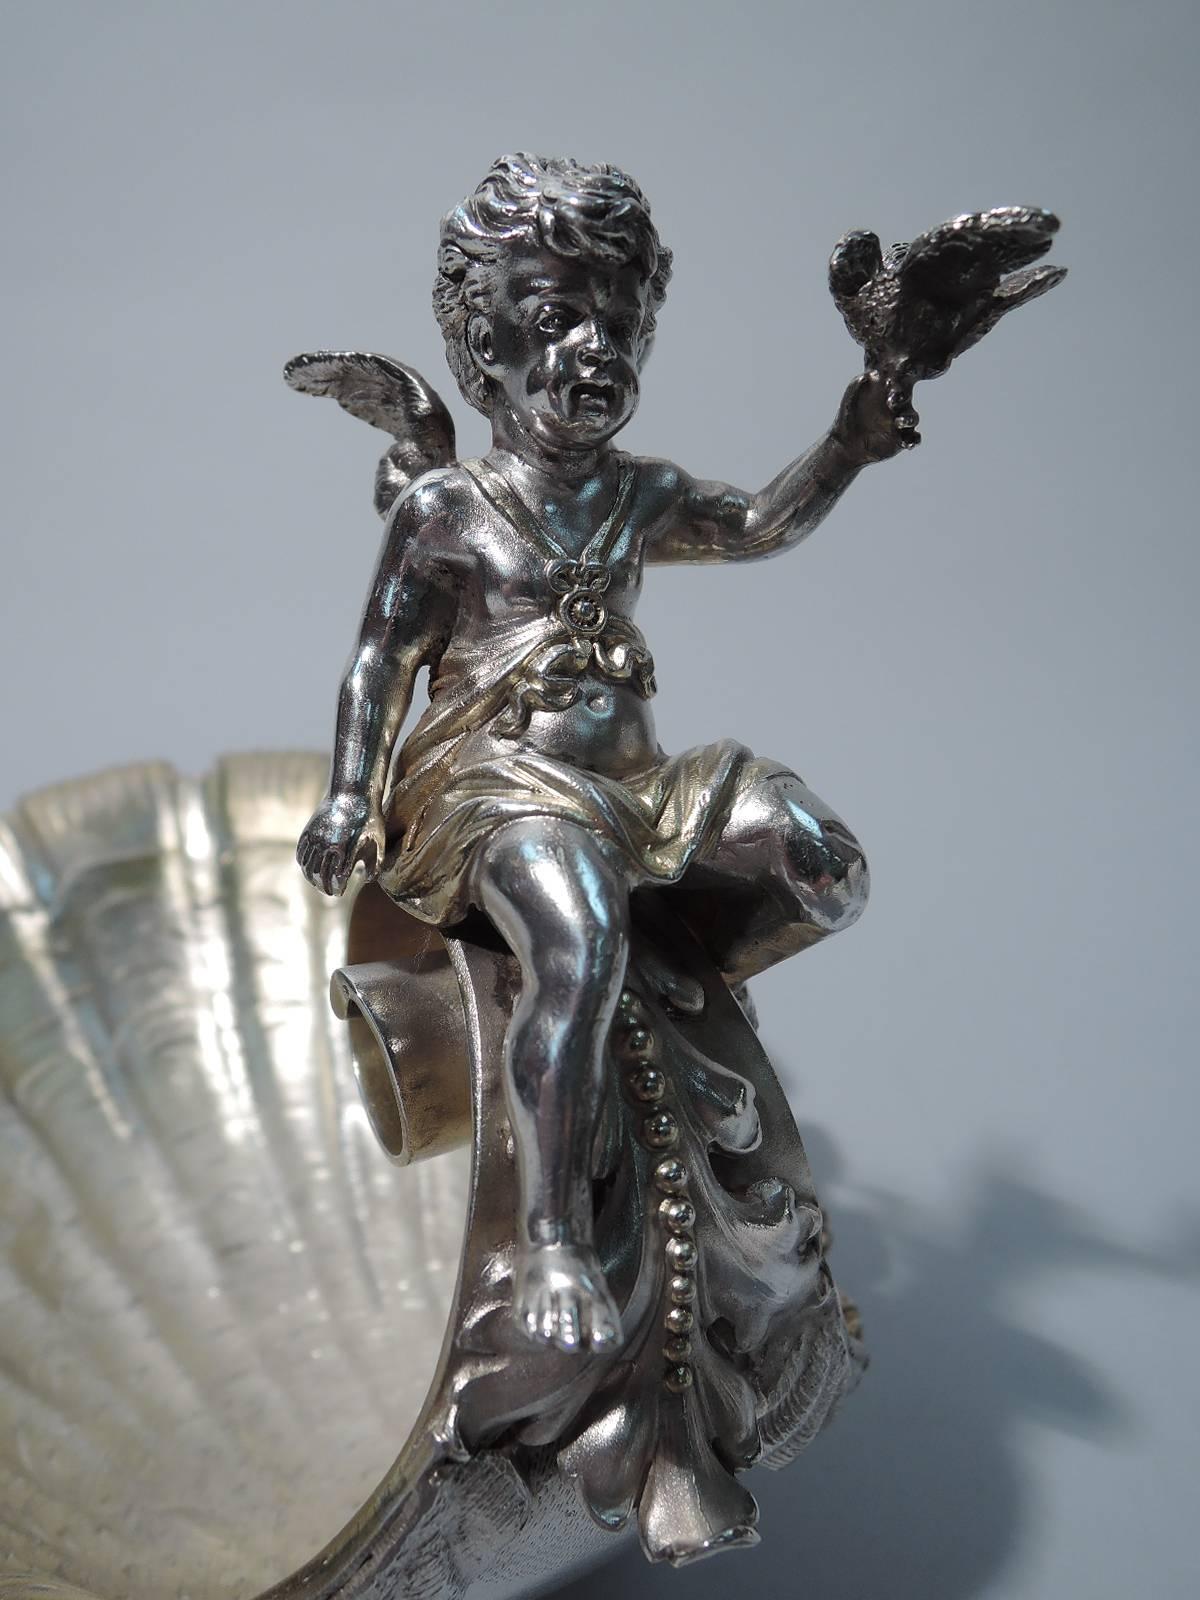 German 800 silver bowl, circa 1900. Shell form with flutes and tiered striations, terminating in volute scroll. Mounted to scroll is cast figure of winged and chubby cherub with bird perched on raised hand. Bowl interior has light gilt wash as does